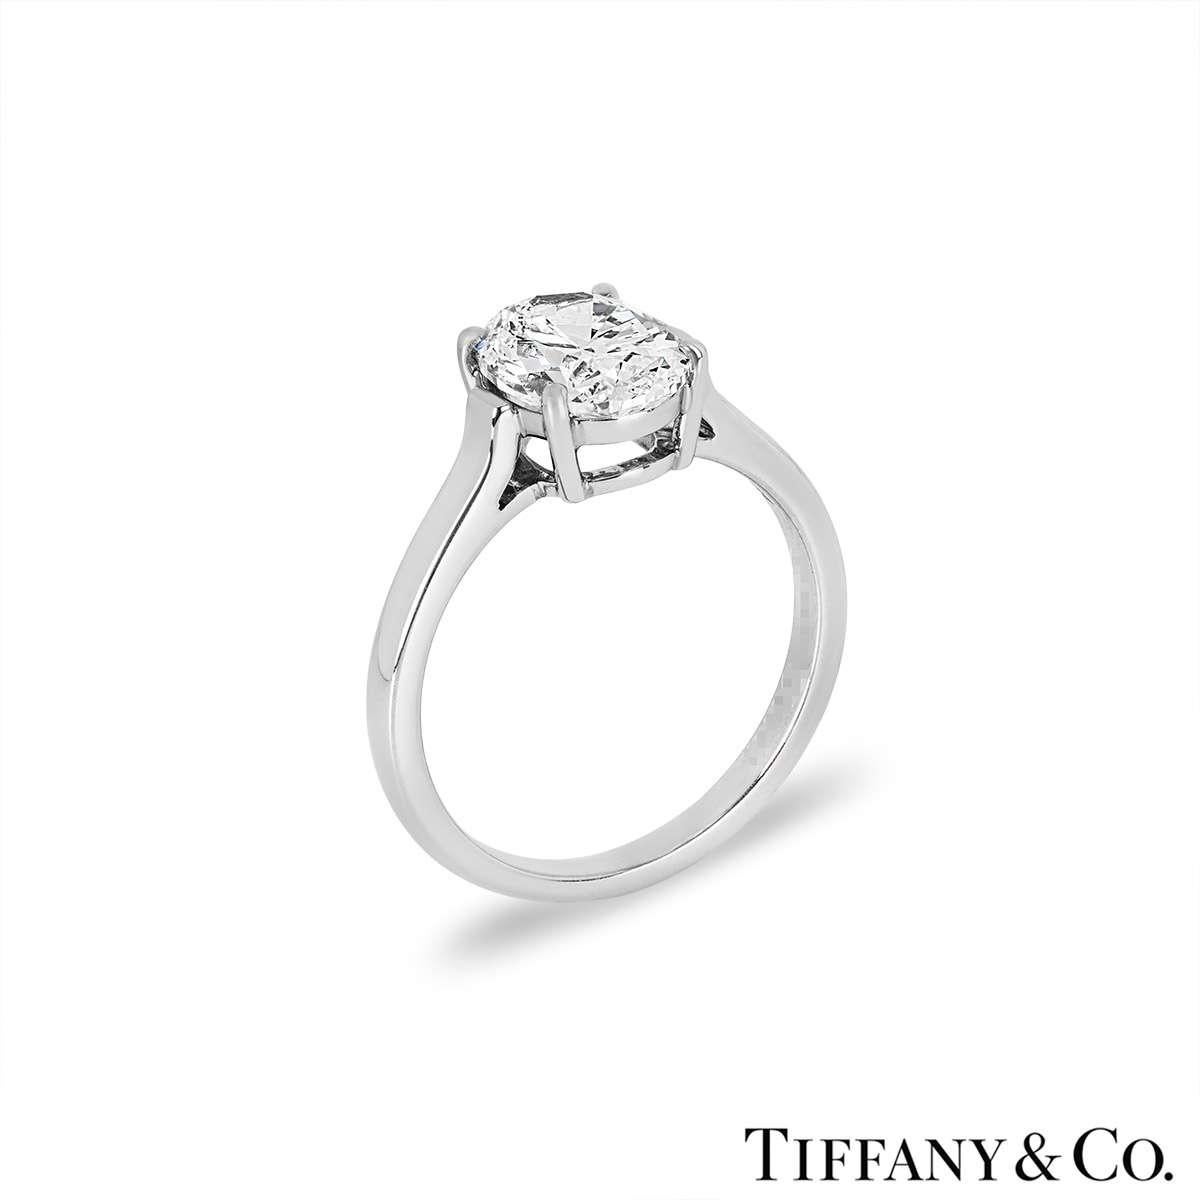 A stunning platinum diamond ring by Tiffany & Co. The ring comprises of an oval cut diamond in a 4 claw setting with a weight of 2.06ct, D colour and VVS2 clarity. The ring is a size UK M, EU 52 and US 6 but can be adjusted for a perfect fit and has